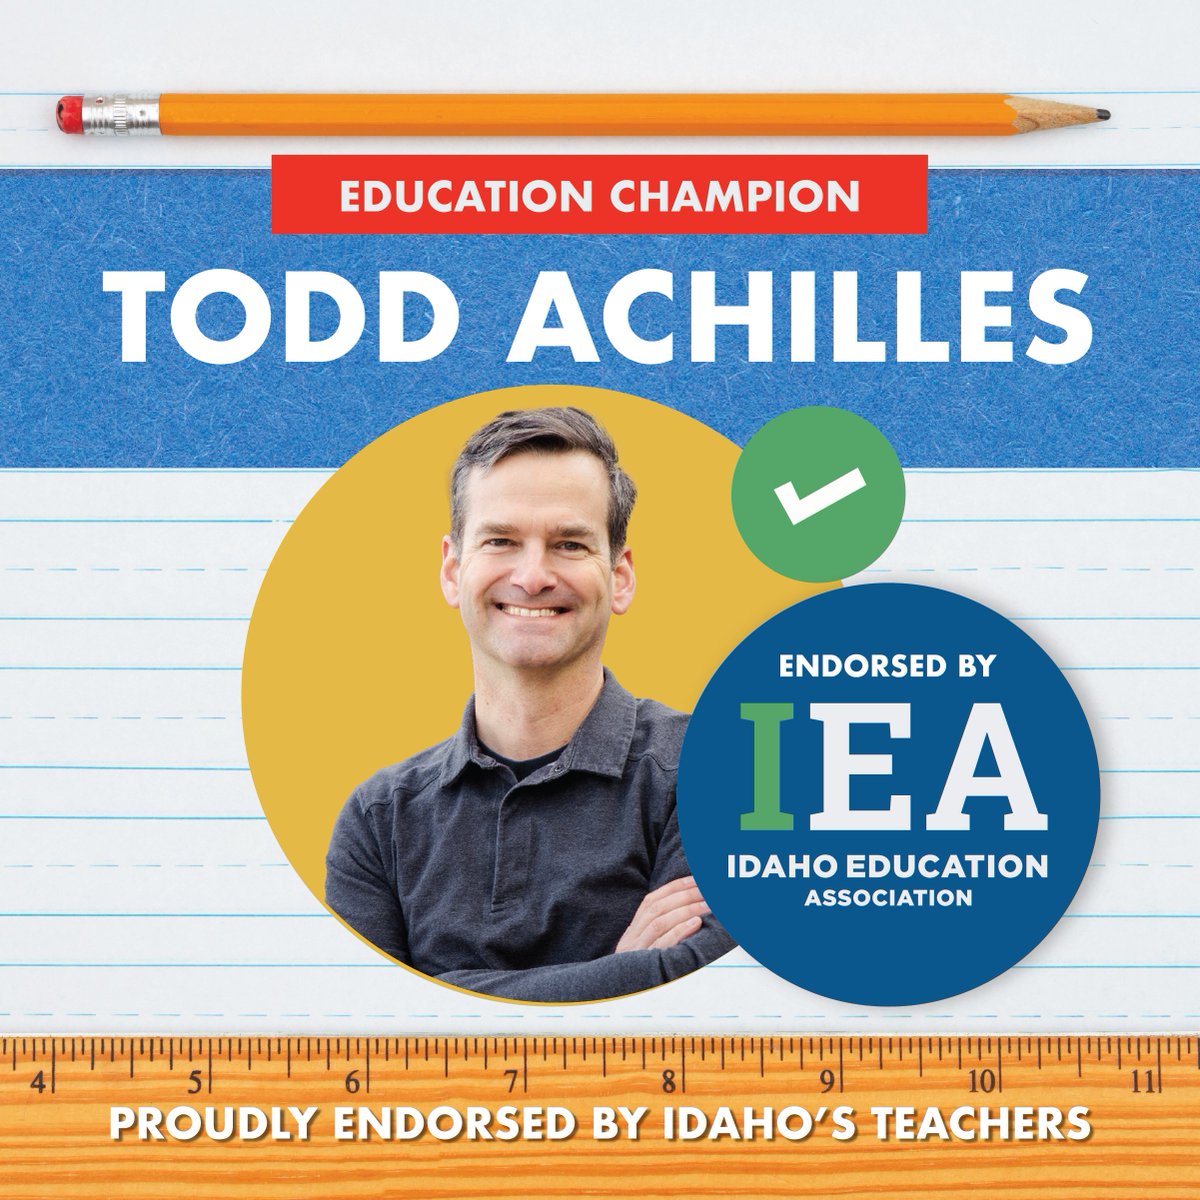 Humbled to receive @idahoea's endorsement. As an educator, I'm deeply committed to fully funding our public schools and universities so that every Idaho student has the chance to succeed. I'm grateful for IEA's advocacy and all they do to support our students and educators.